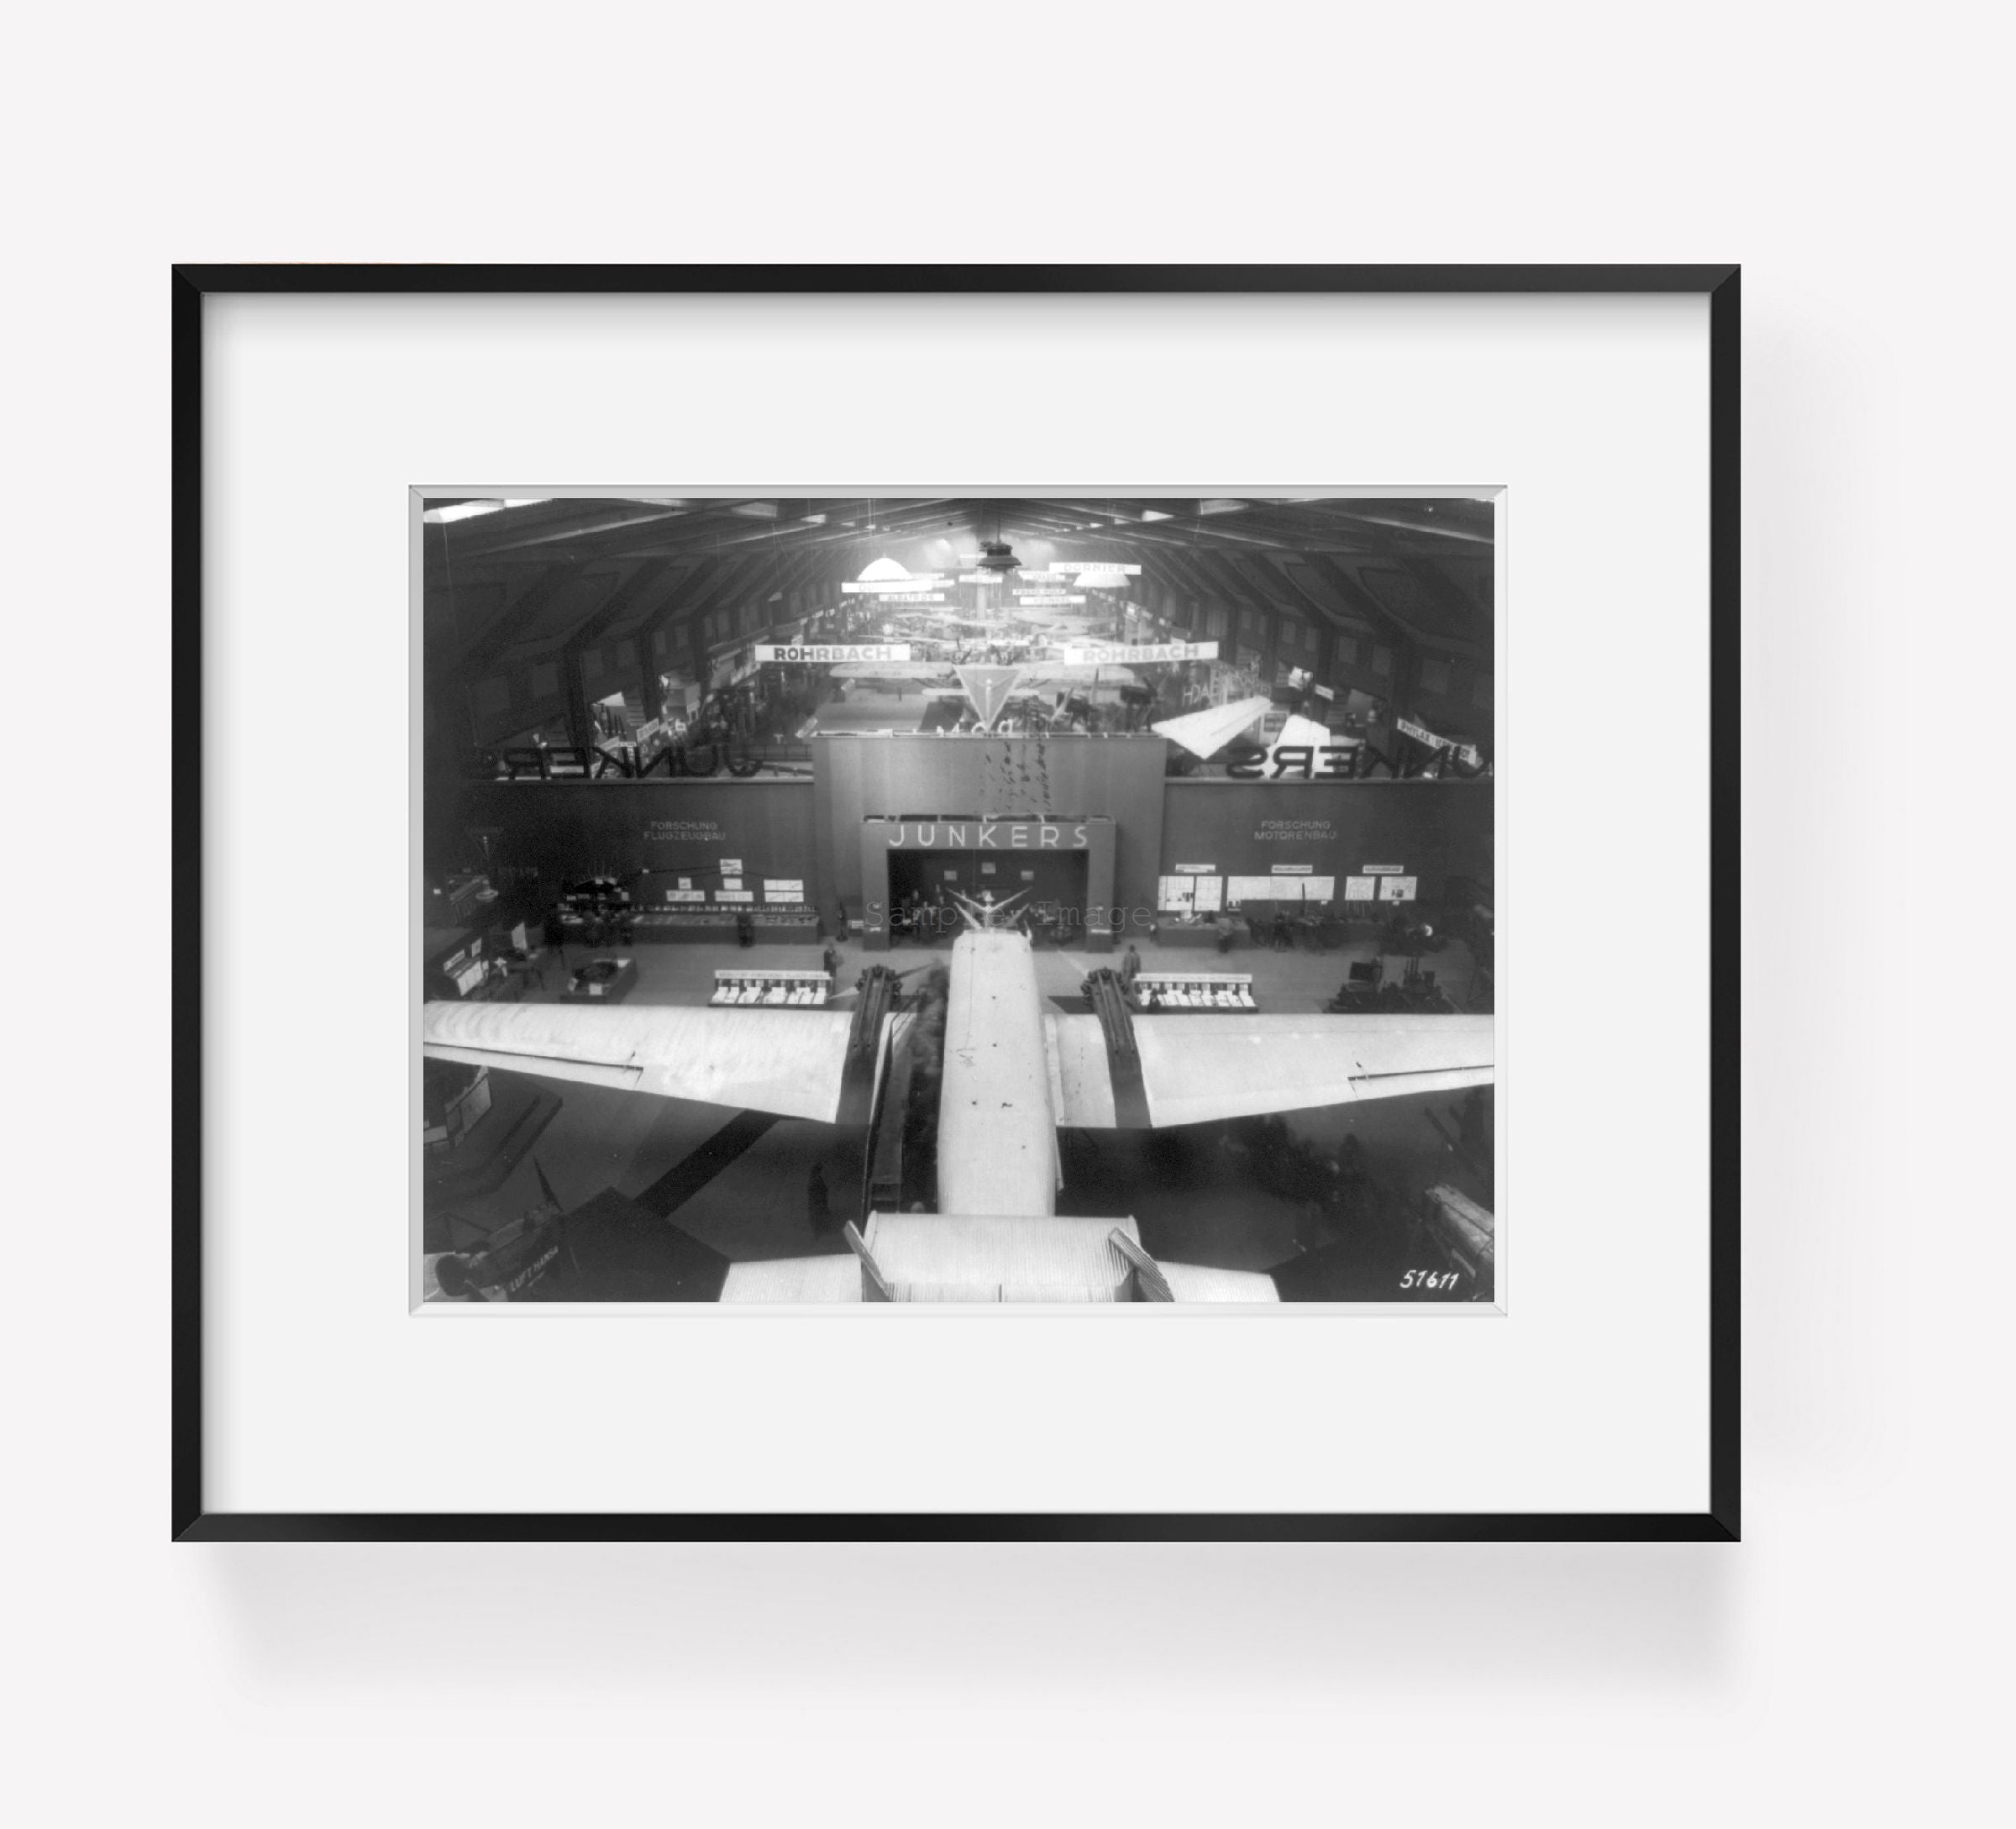 ca. 1930 photograph of Exhibits at Berlin air show; birds-eye view inside large